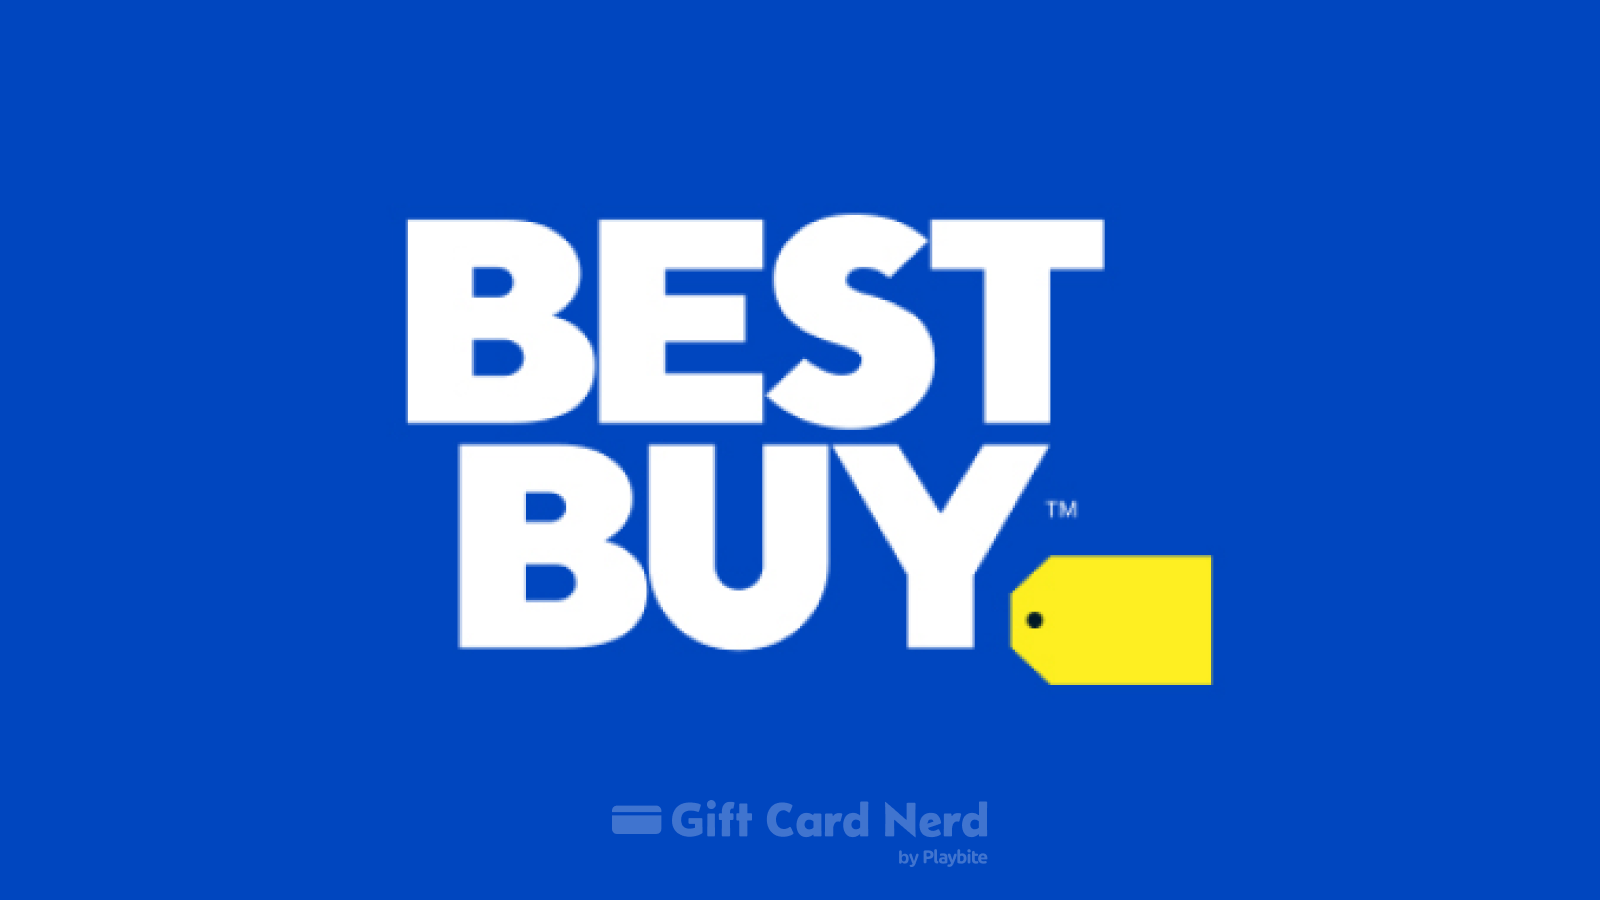 Can I Use a Best Buy Gift Card on Paypal?